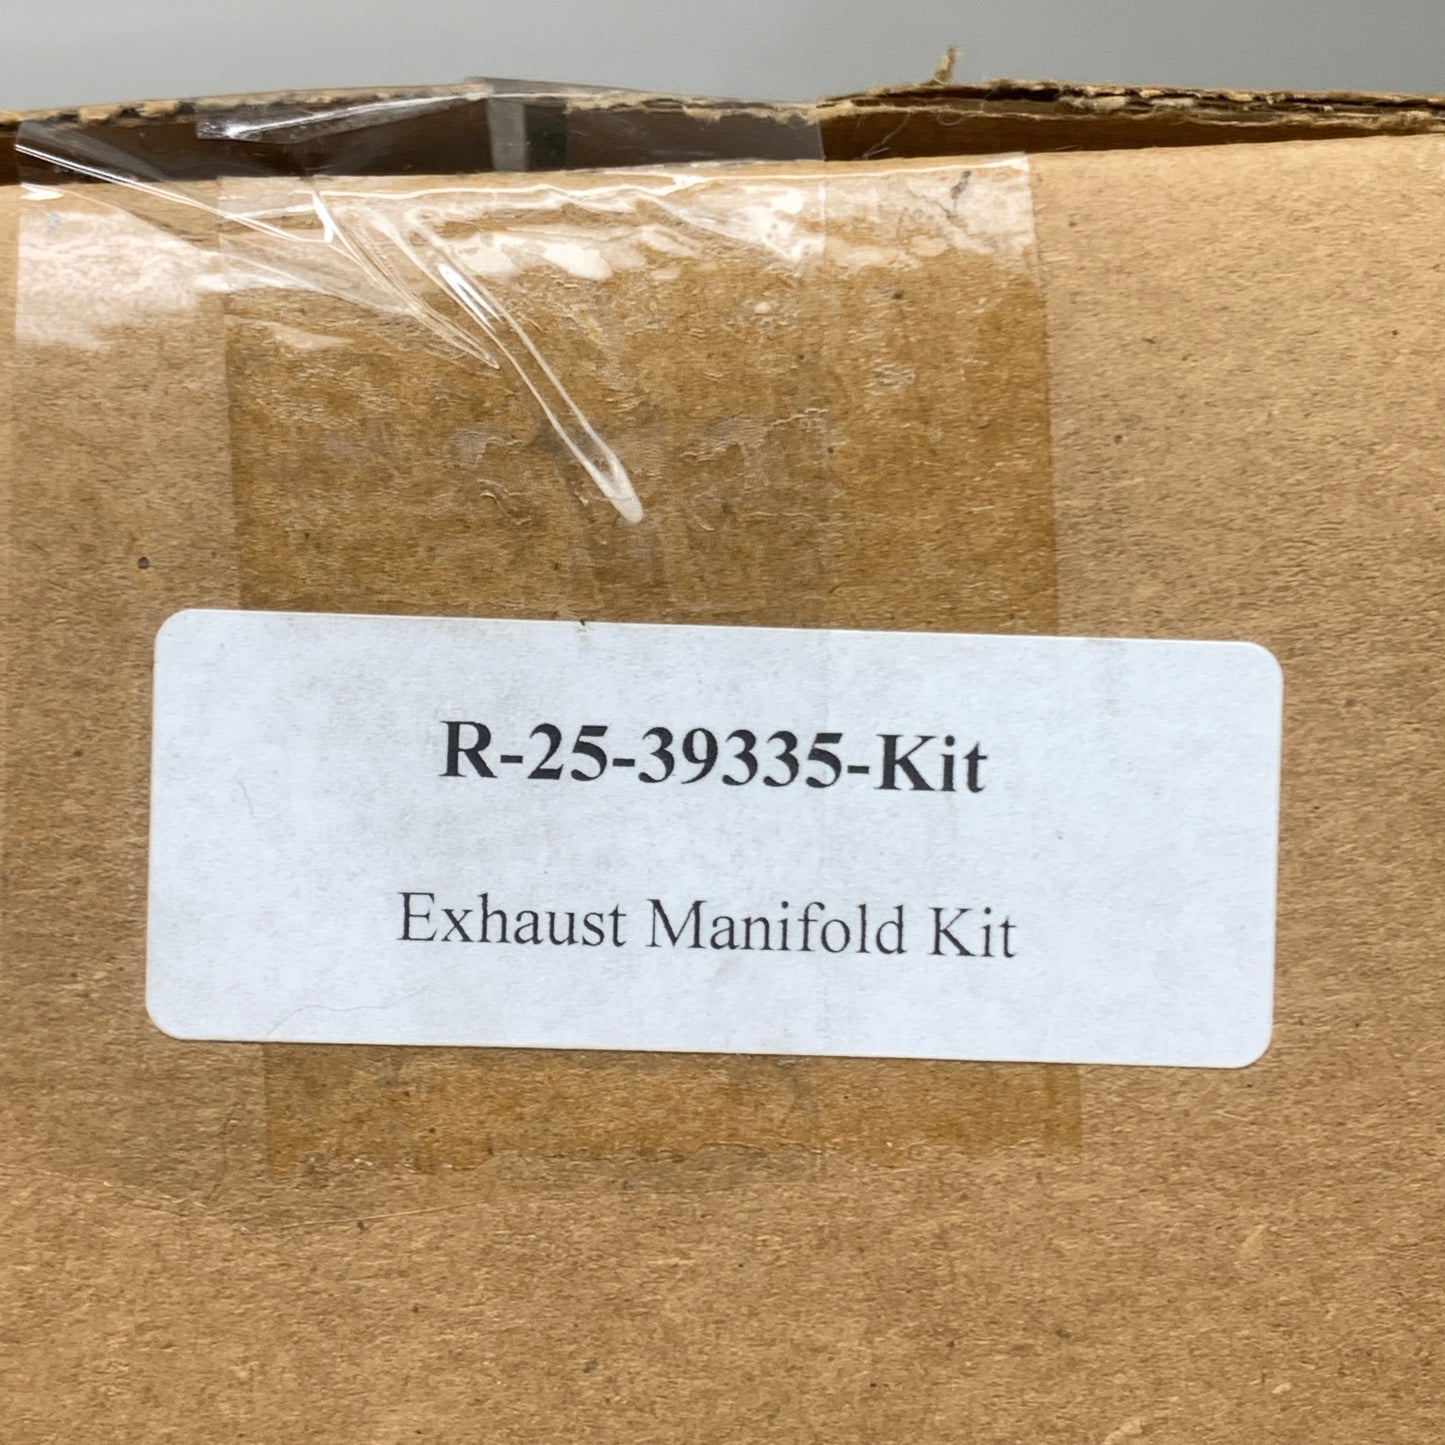 EXHAUST MANIFOLD Replacement Kit for CARRIER Reefer Compressor R-25-39335-Kit